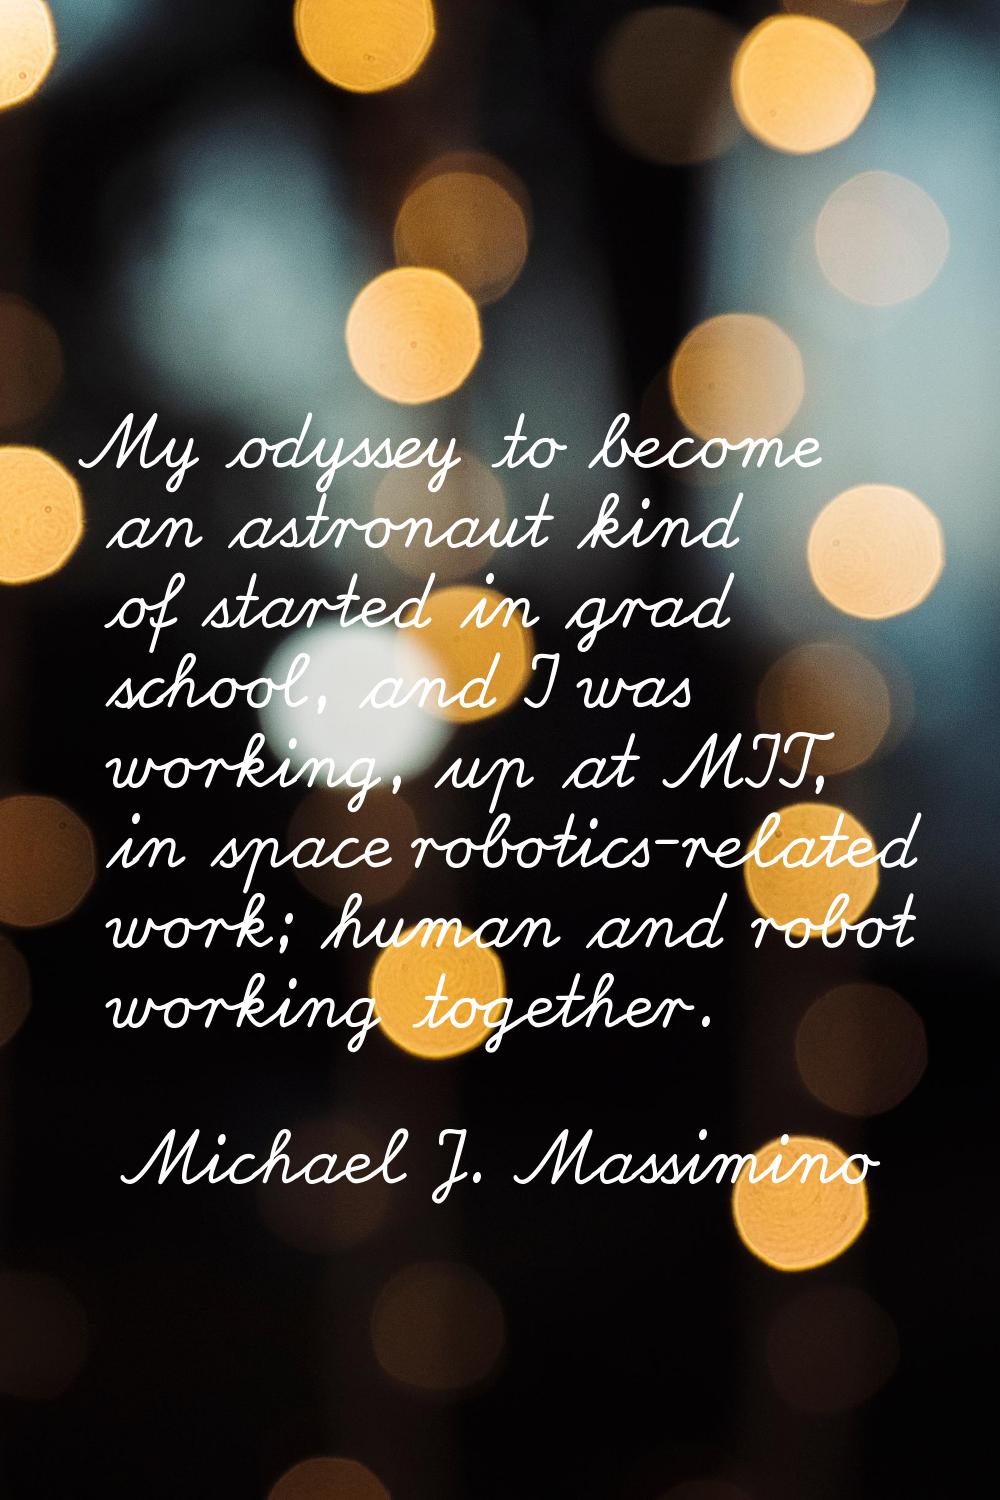 My odyssey to become an astronaut kind of started in grad school, and I was working, up at MIT, in 